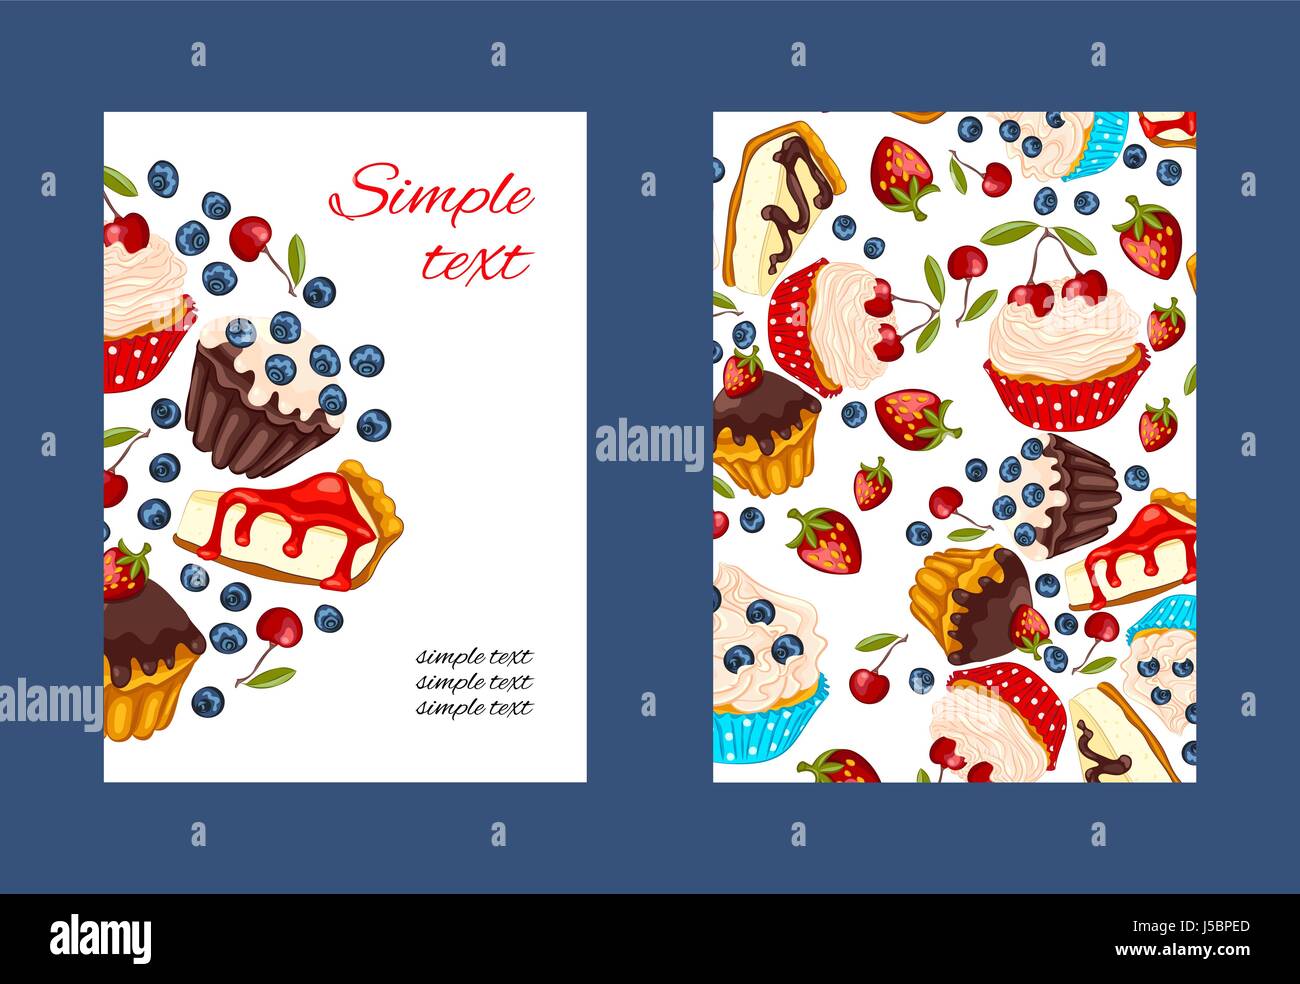 Cupcake vector promo card set with colorful illustrations. Restaurant or cafe menu design. Flyer template with berries, muffins and cheesecake. Stock Vector